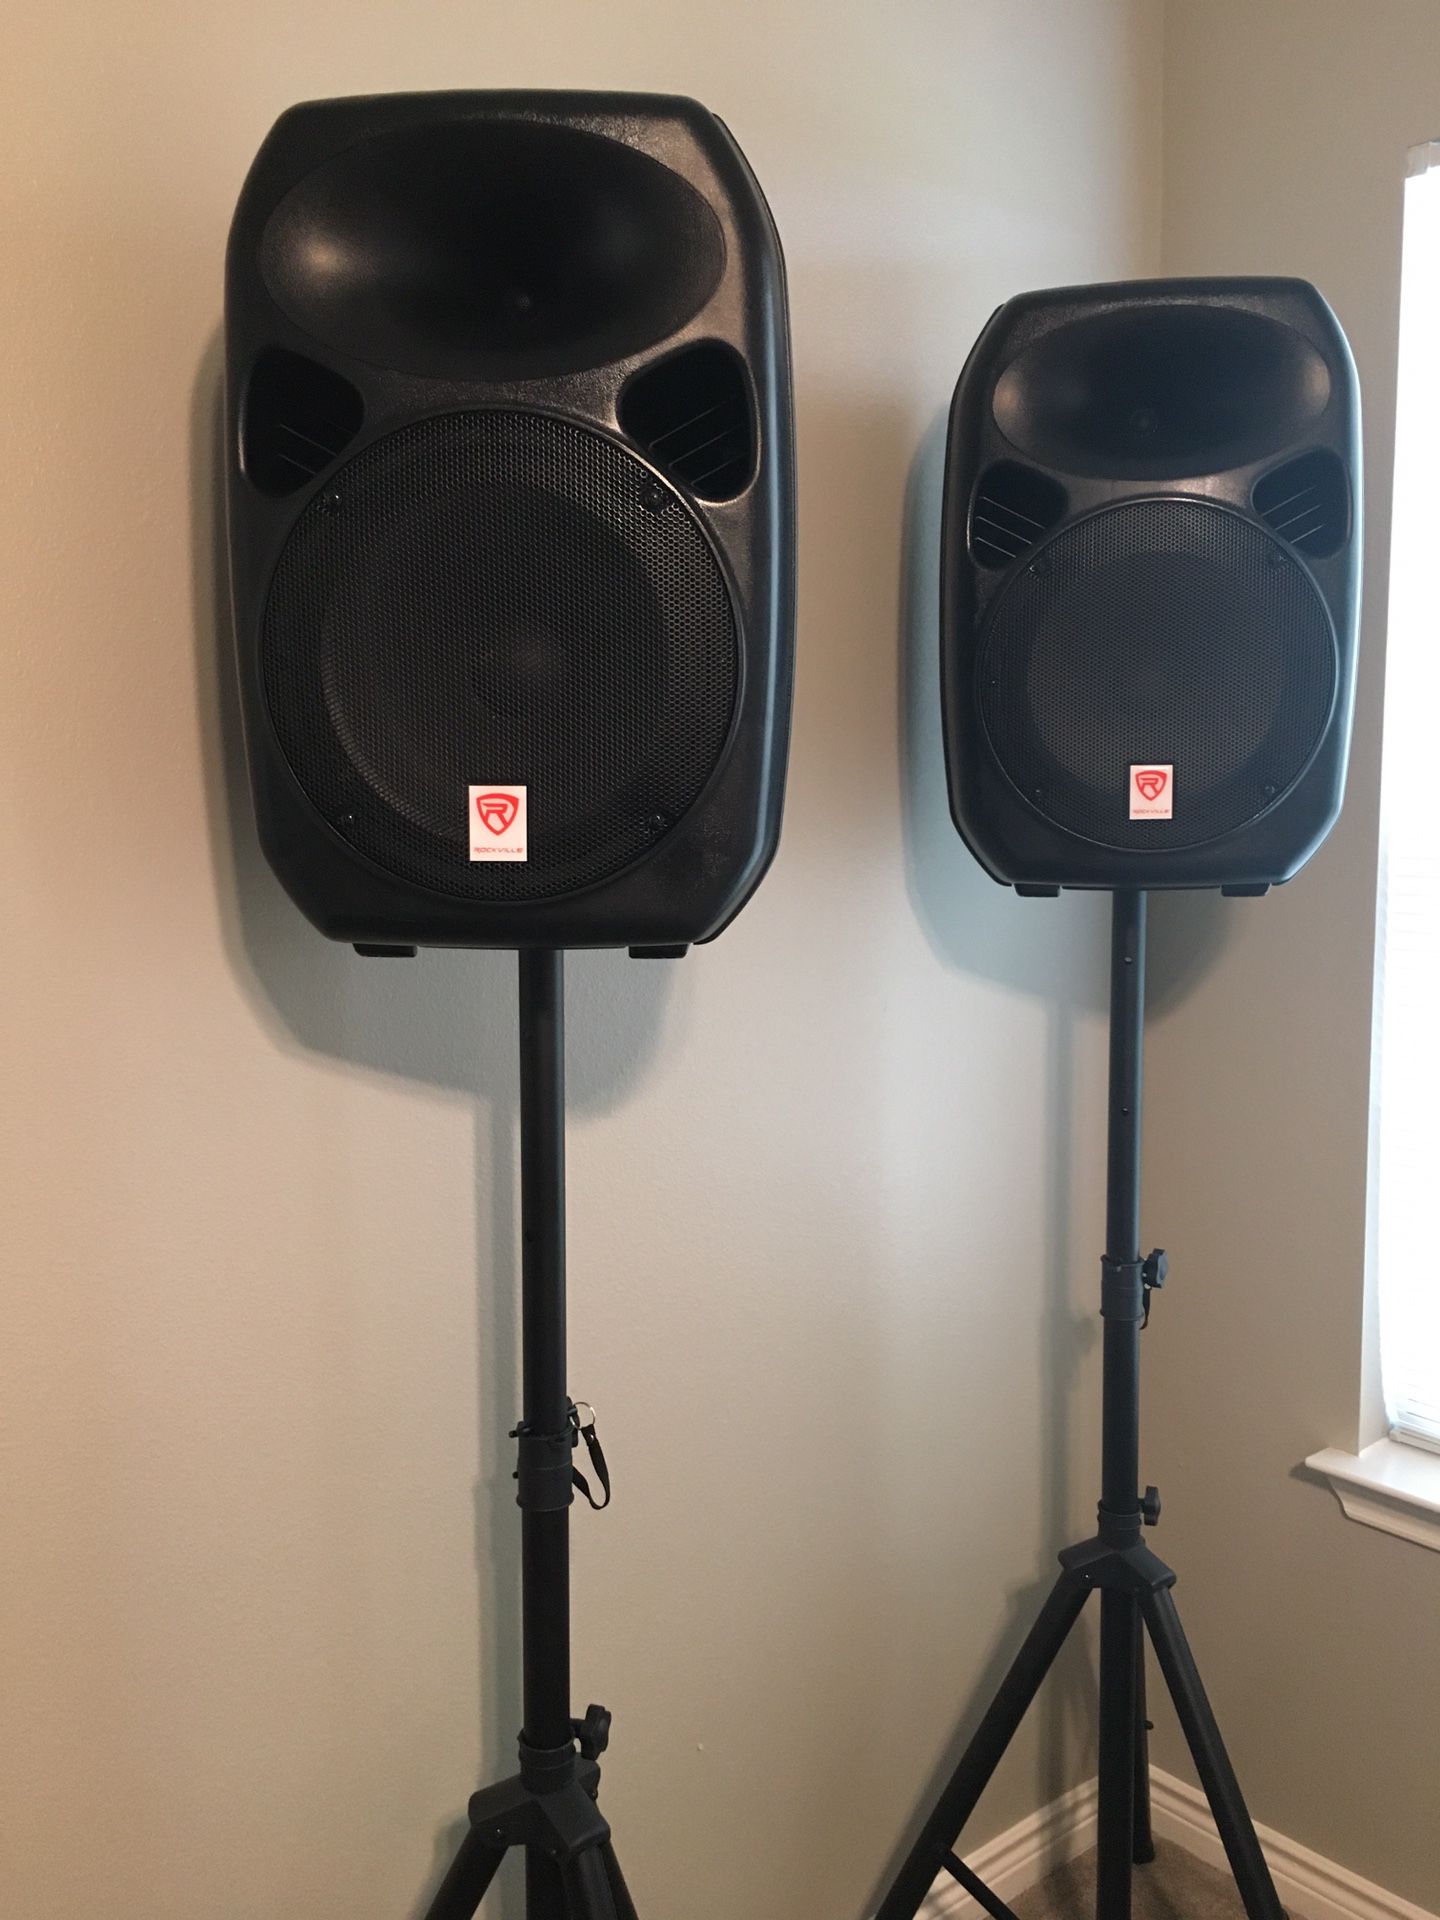 Brand New Rockville Power Gig Speakers and Mic